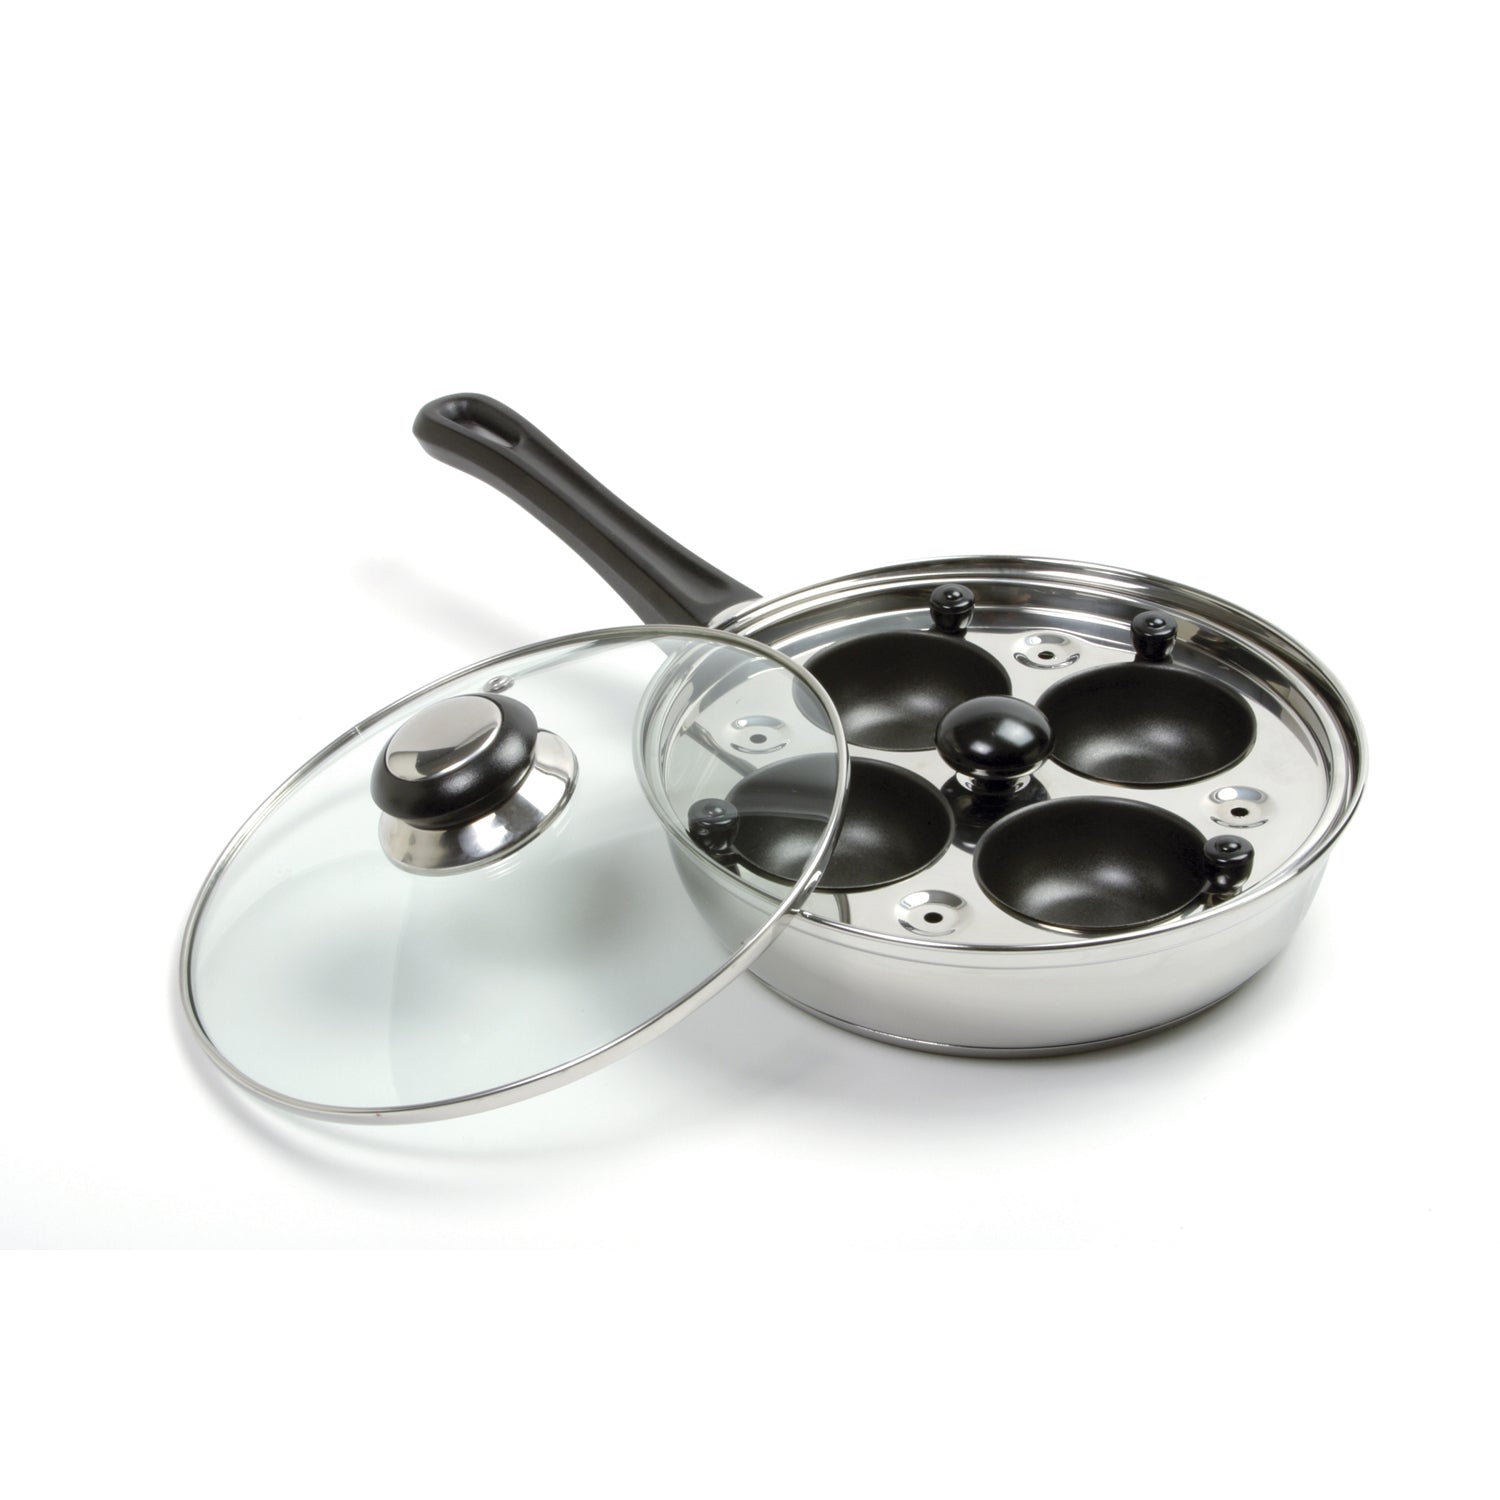 BELLA Stainless Steel and Black Egg Cooker at